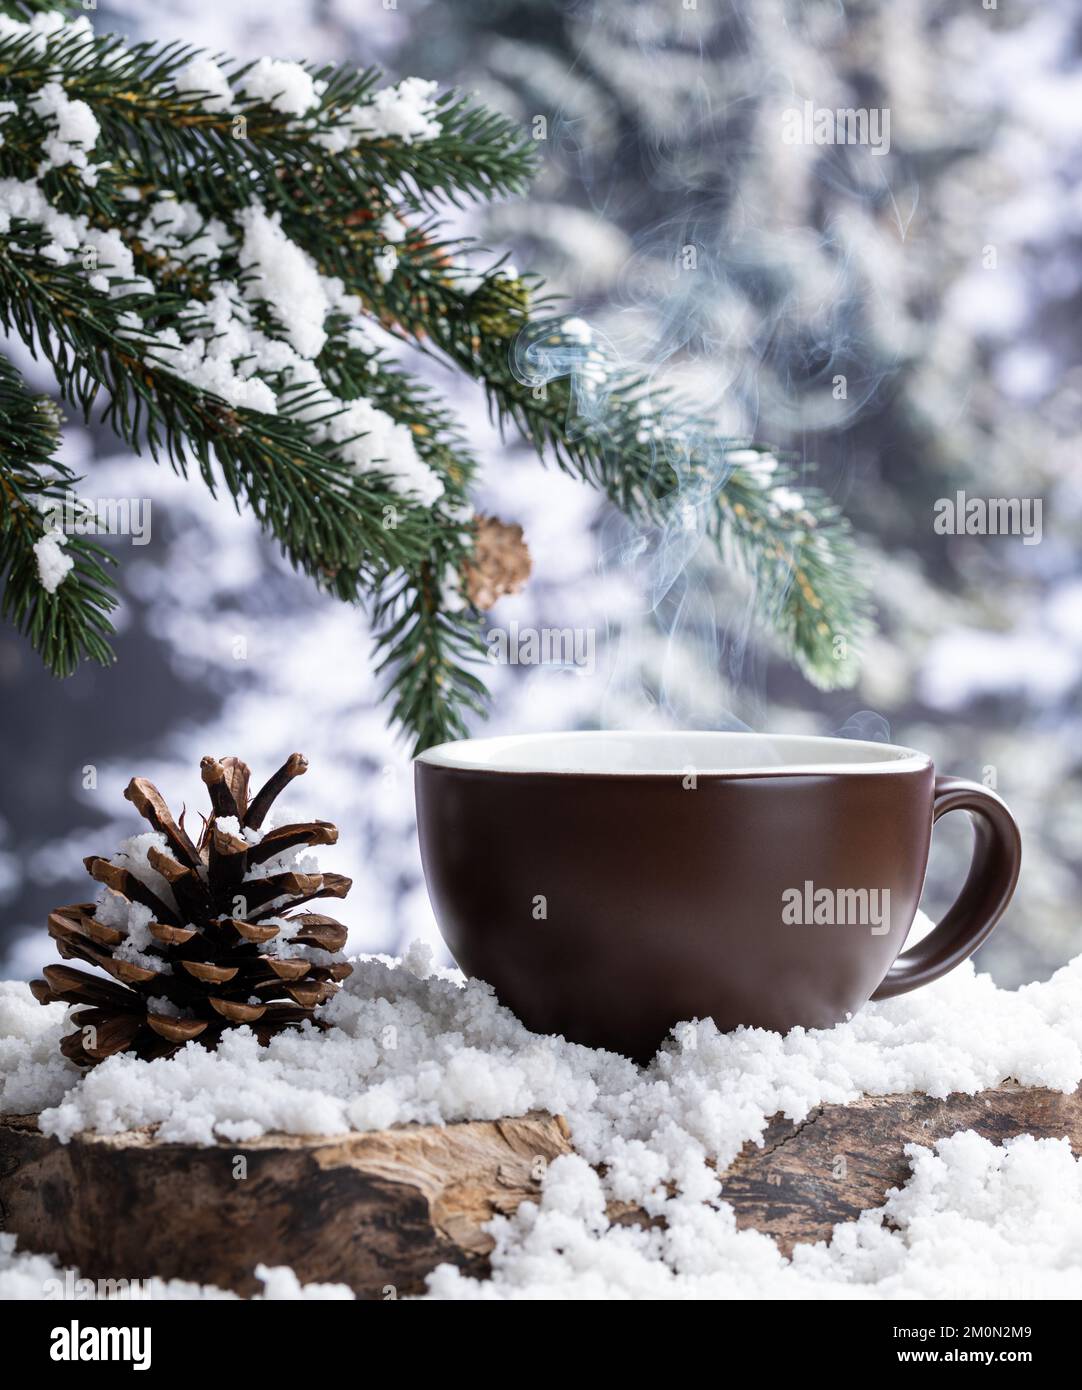 https://c8.alamy.com/comp/2M0N2M9/steaming-hot-drink-in-a-coffee-cup-on-a-snow-covered-tree-stump-with-a-winter-background-2M0N2M9.jpg